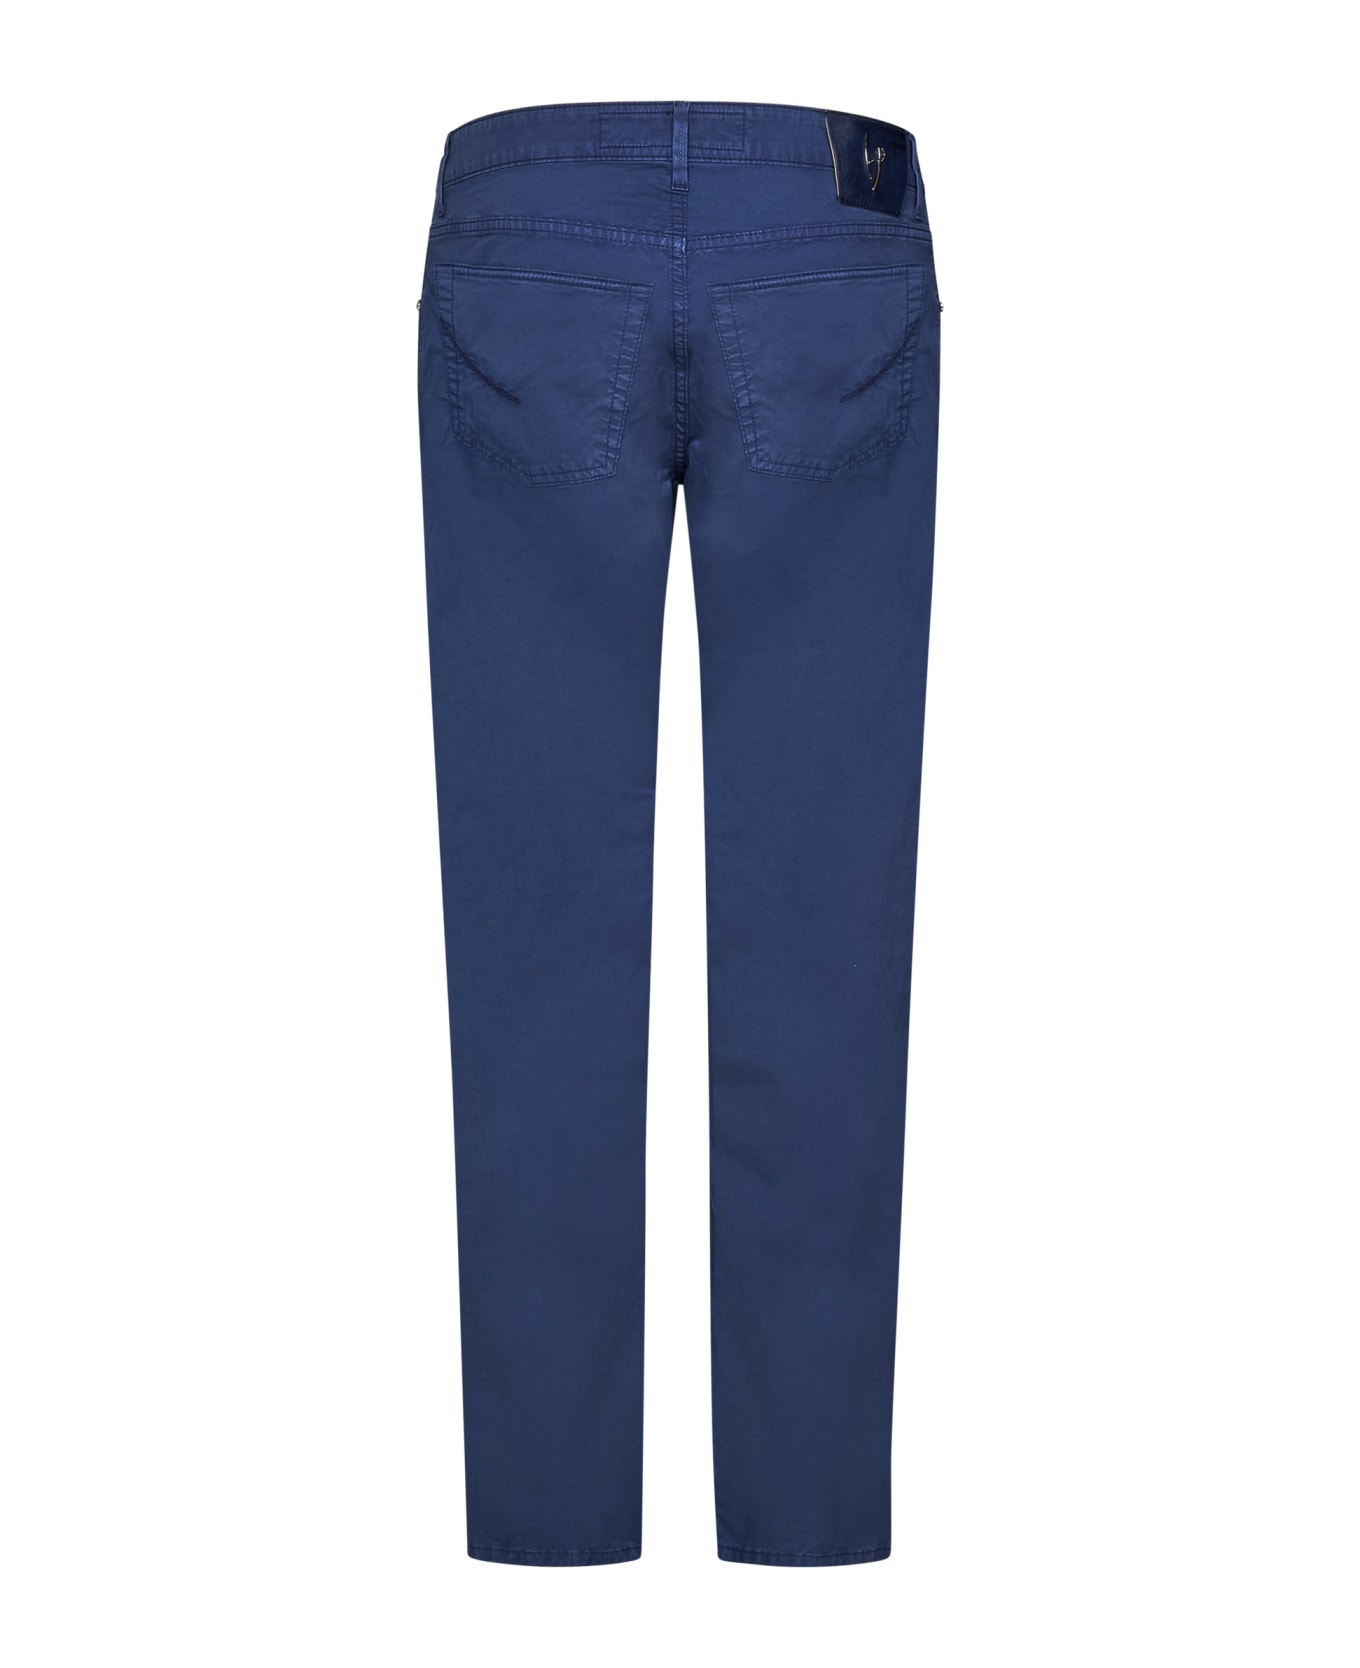 Hand Picked Handpicked Orvieto Trousers - Blue